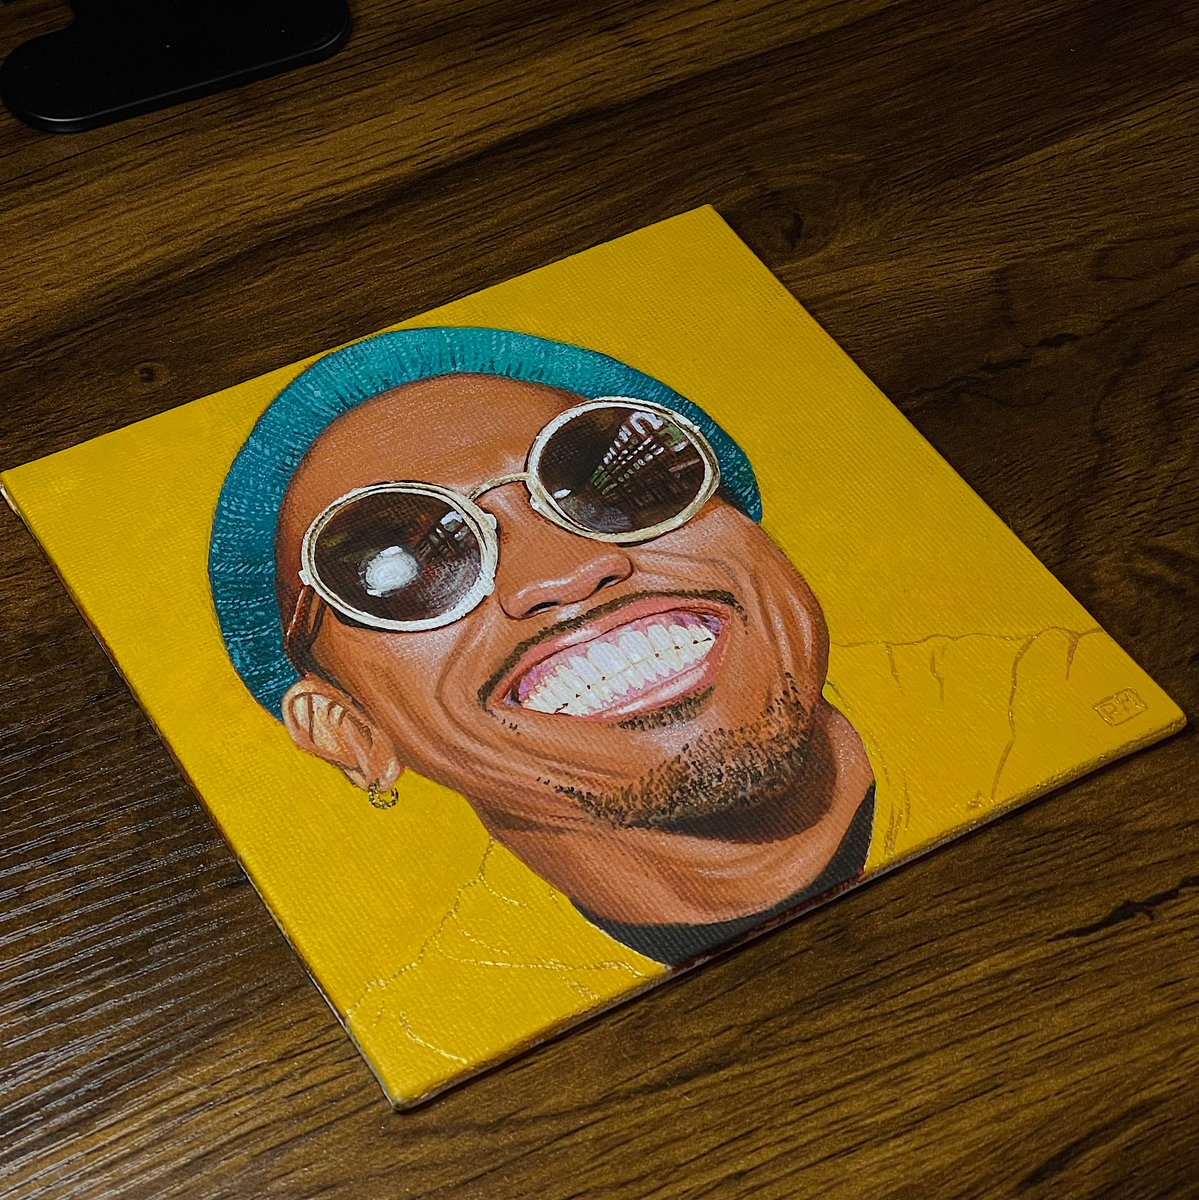 ‘Anderson Paak’
Acrylic on 6x6 canvas board
Available to purchase 
Dm me for more info
#art #painting #acrylicpainting #andersonpaak